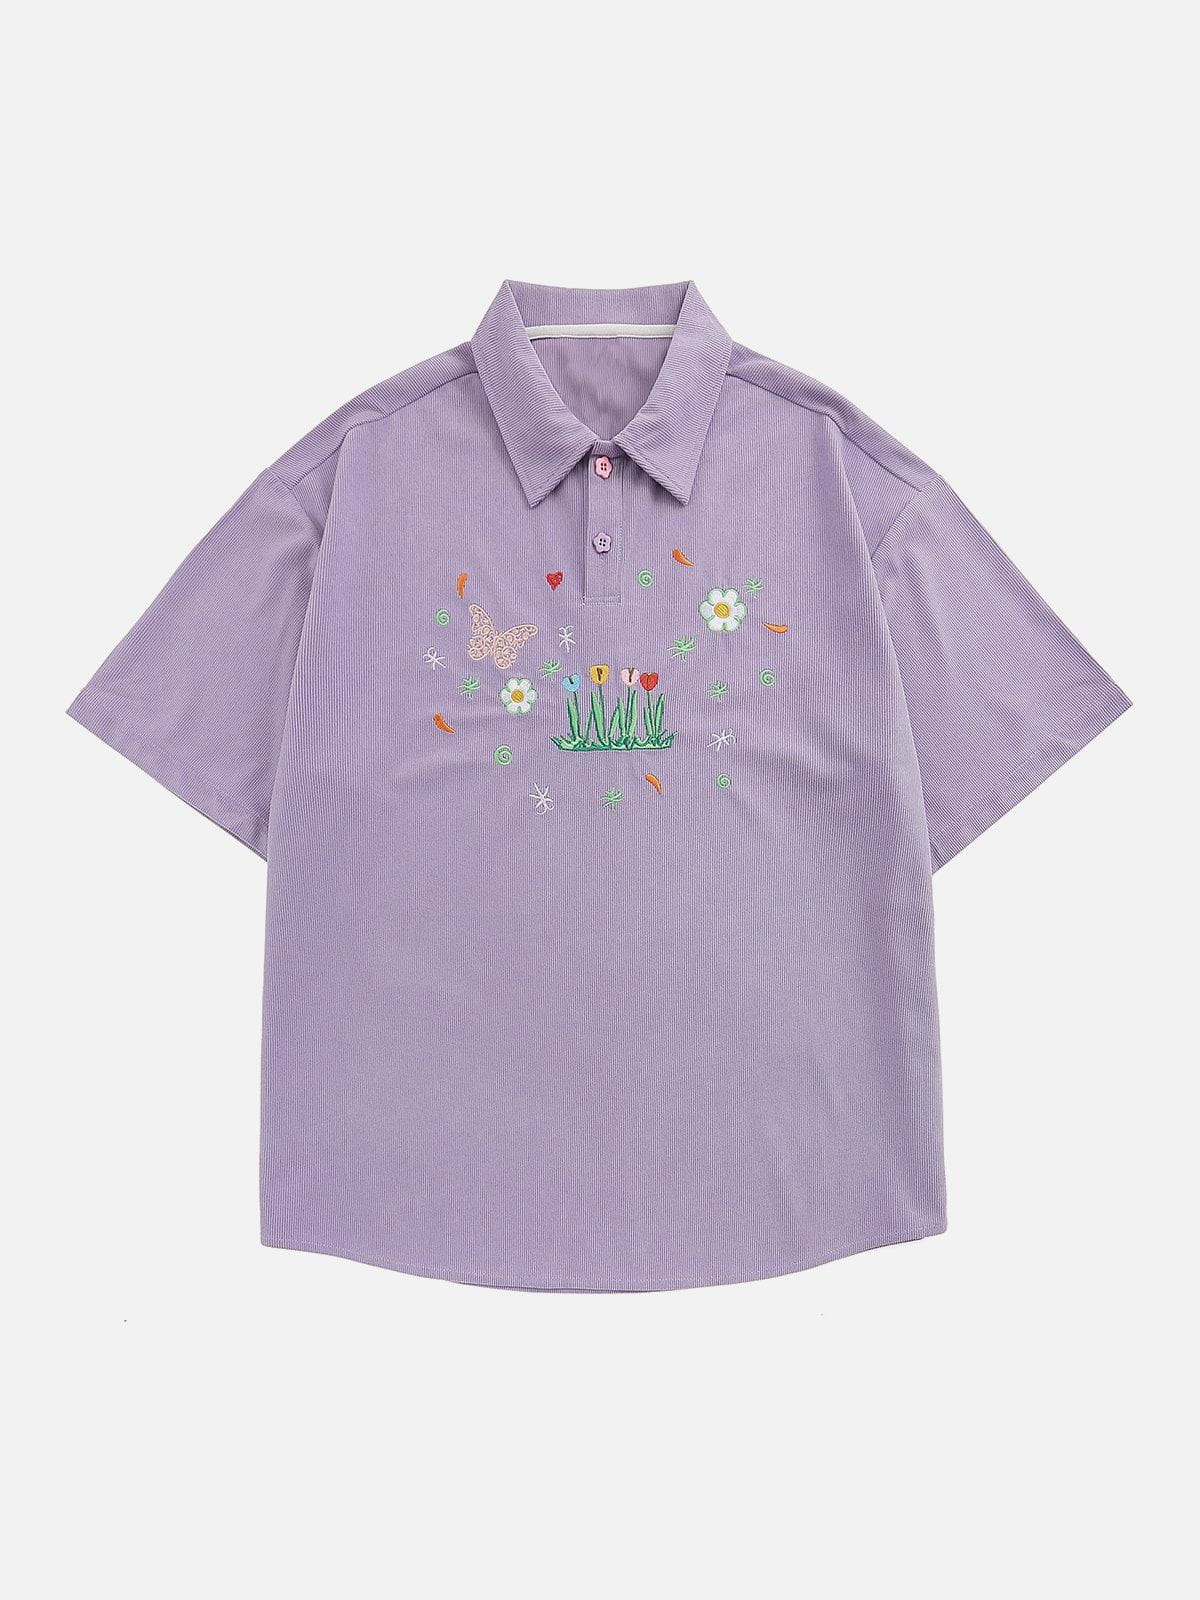 Sneakerland™ - Flower Butterfly Embroidery Polo Tee